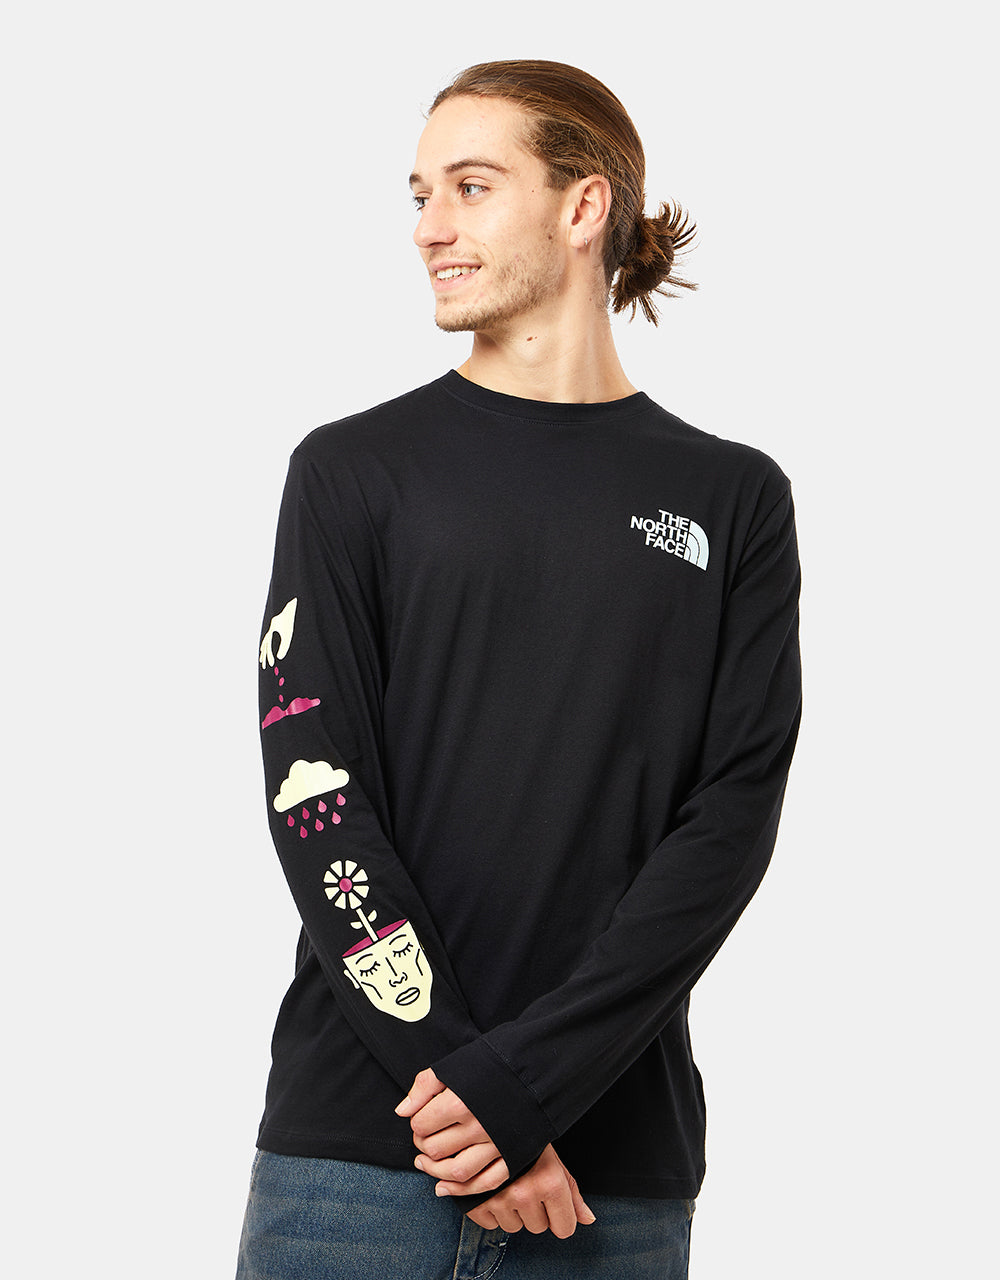 The North Face Brand Proud L/S T-Shirt - TNF Black/Snow